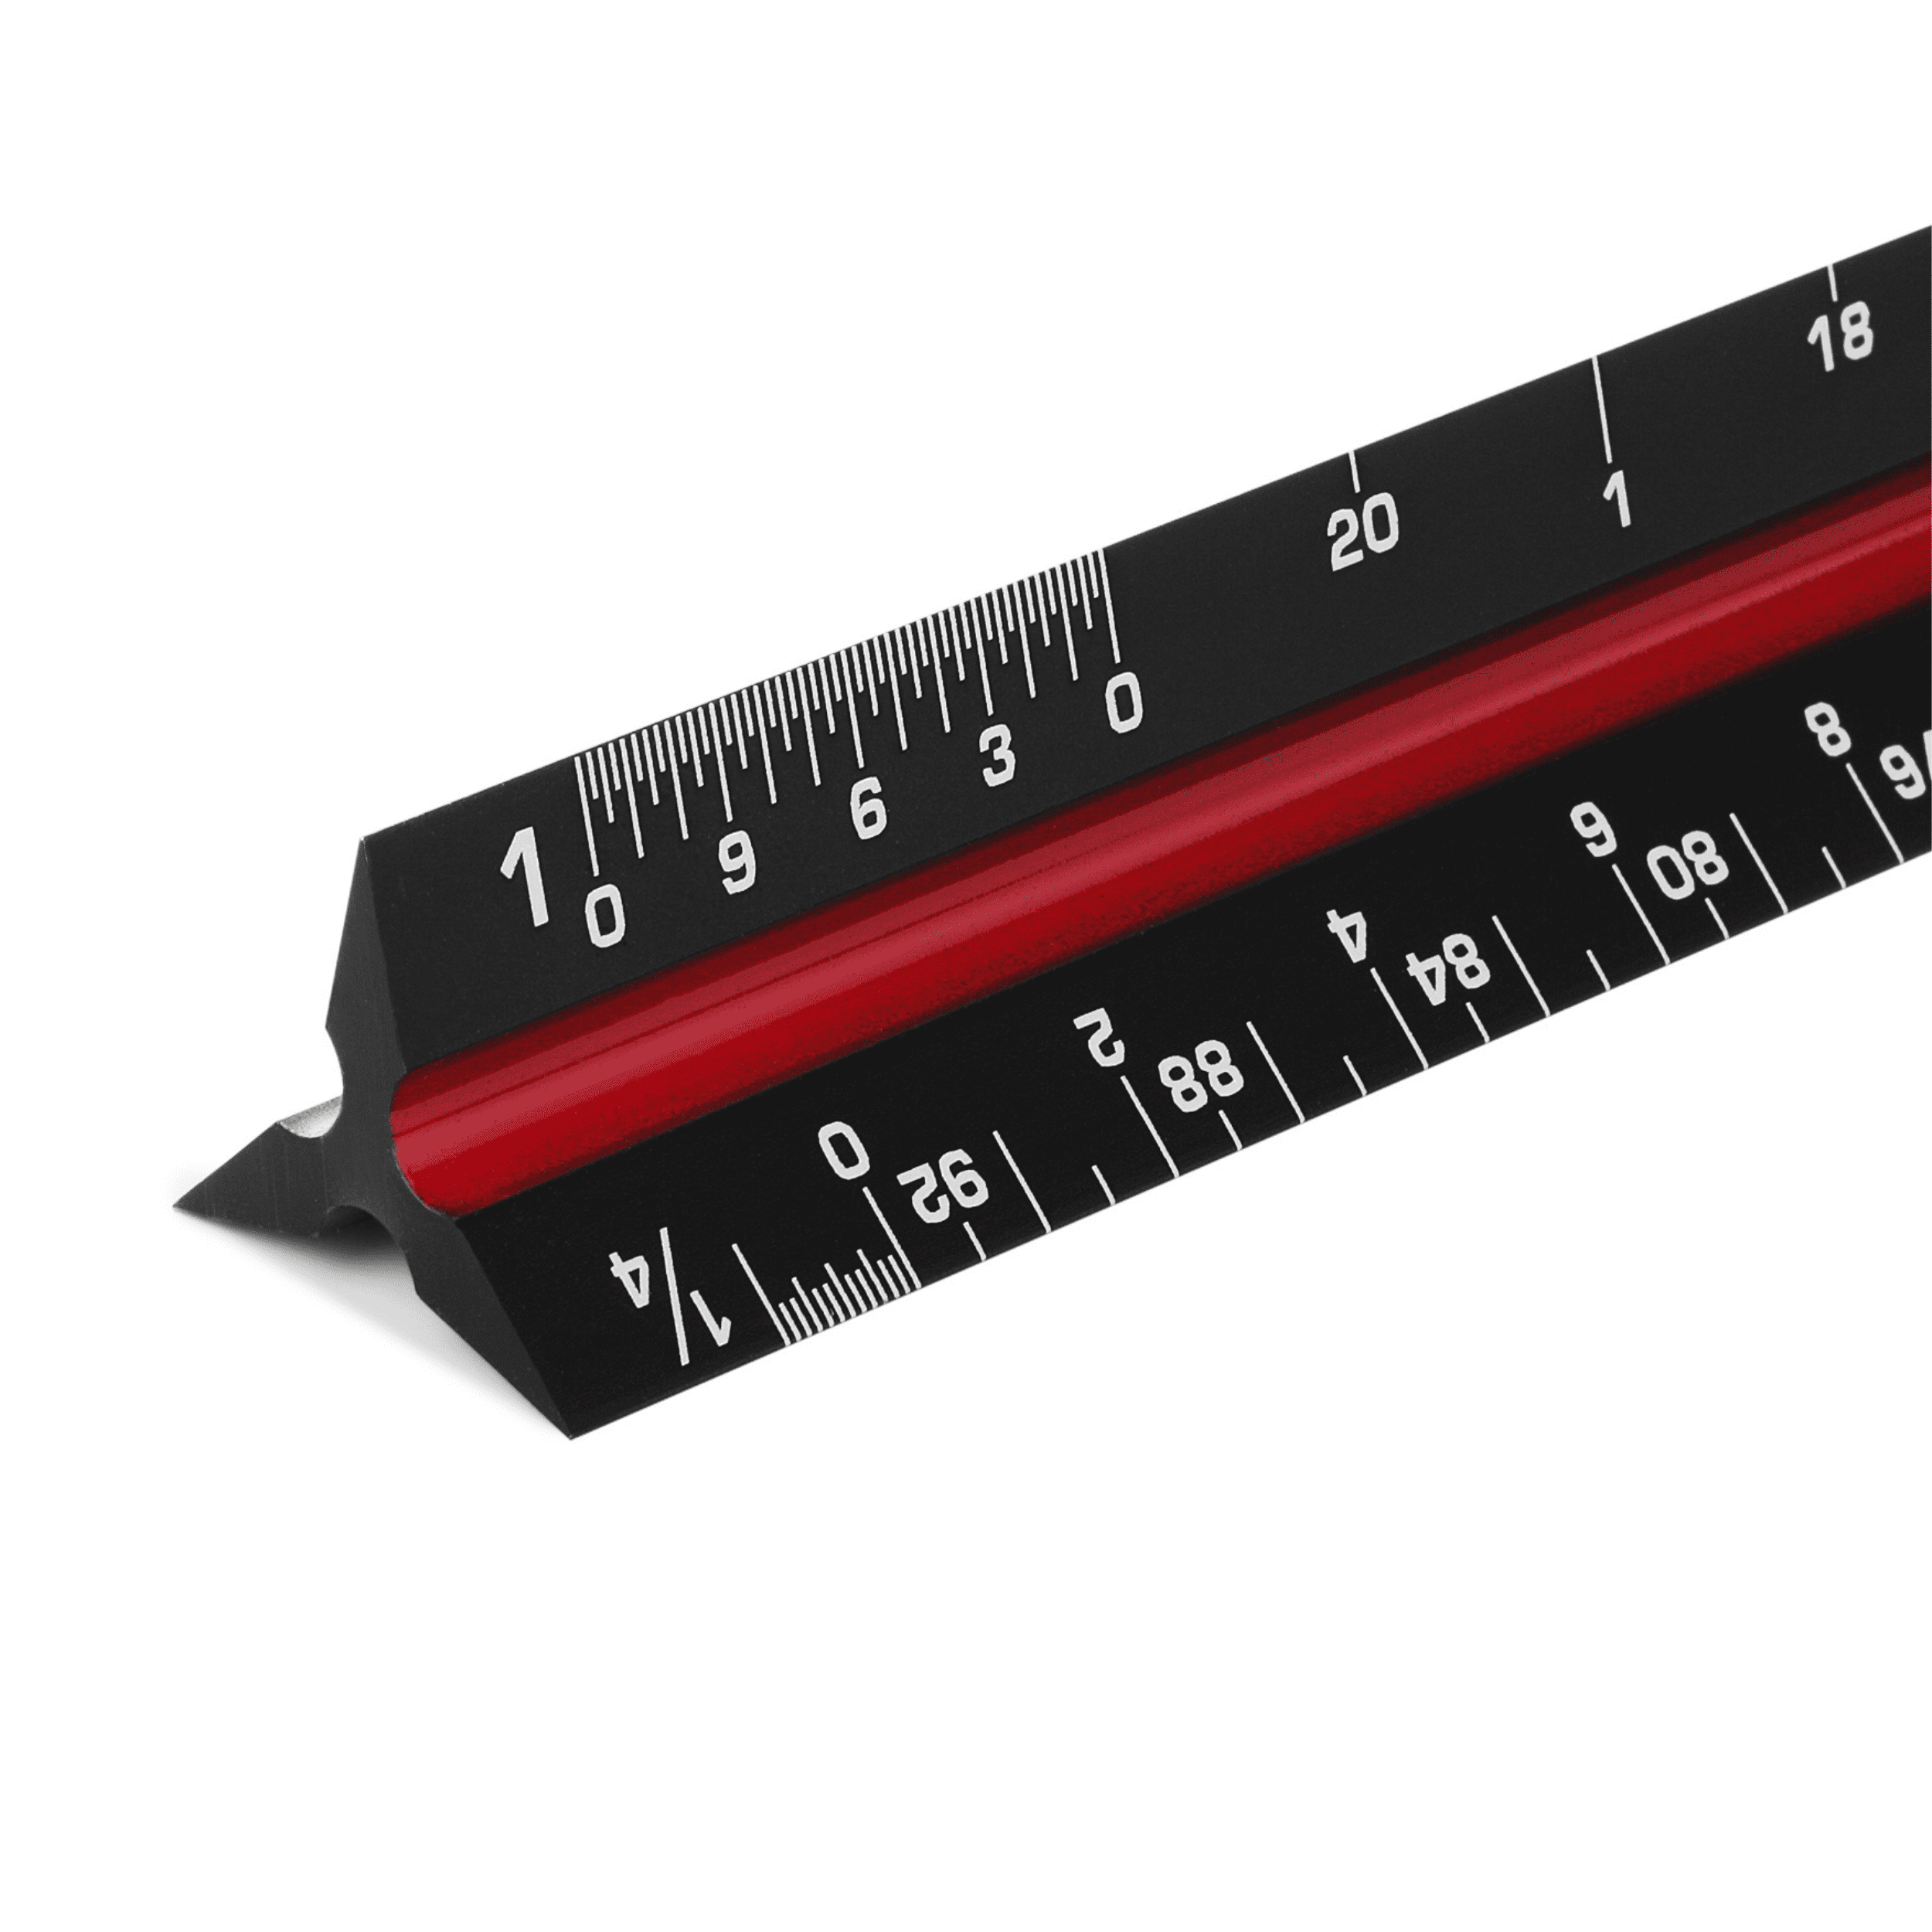 30cm Aluminium Scale Ruler Engineers Architects Building Plans Technical Drawing 